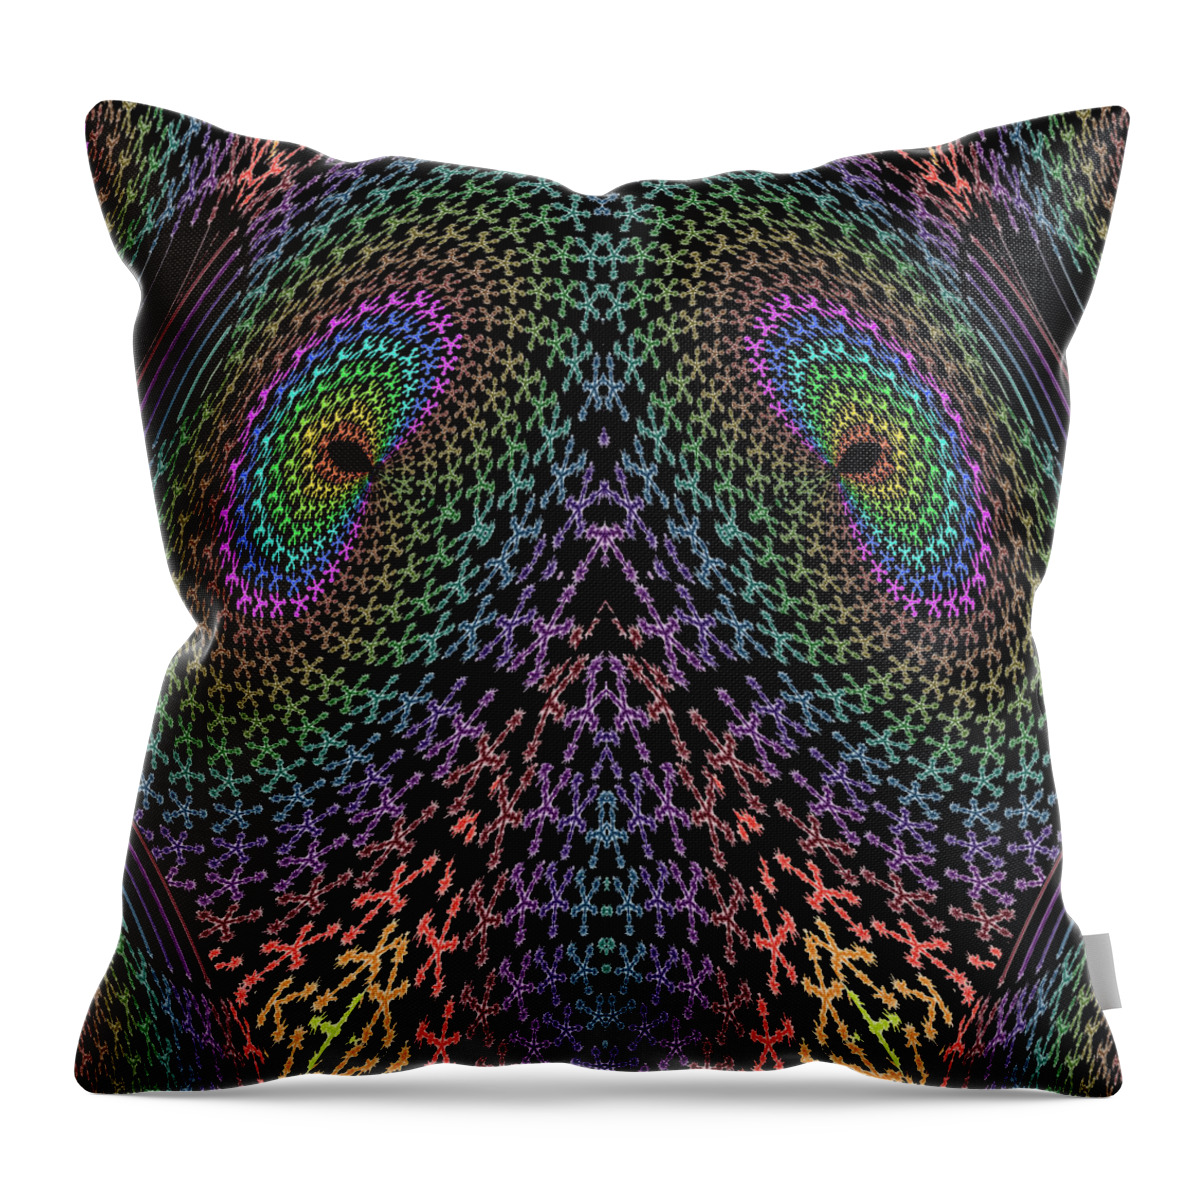 James Smullins Throw Pillow featuring the digital art Abstract Elephant or Fish by James Smullins